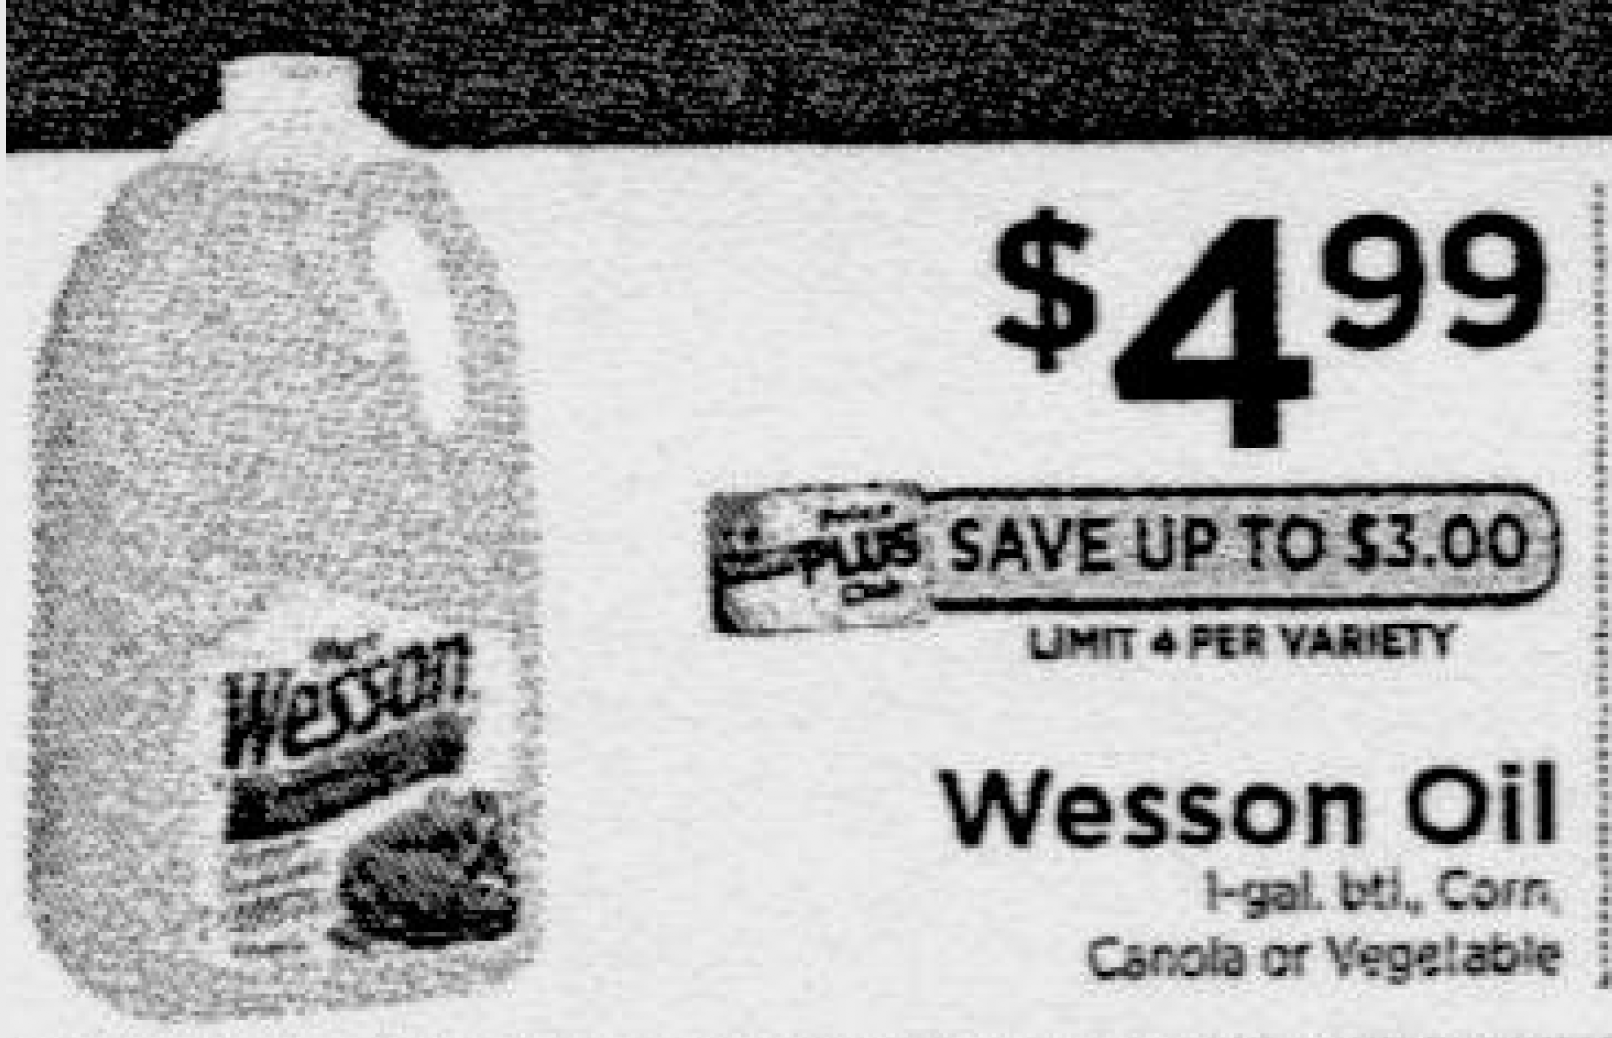 wesson-vegetable-corn-or-canola-oil-gallon-jug-just-3-49-at-shoprite